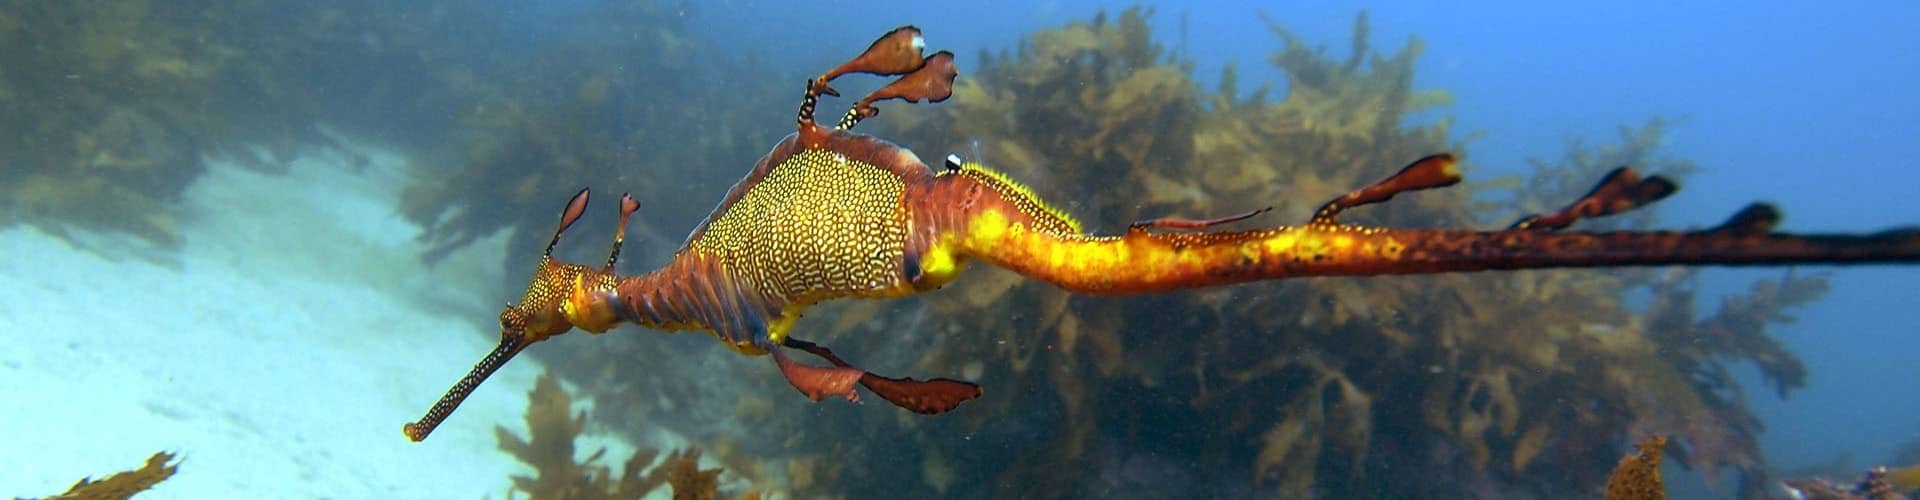 Scuba Diving in Sydney with a seadragon